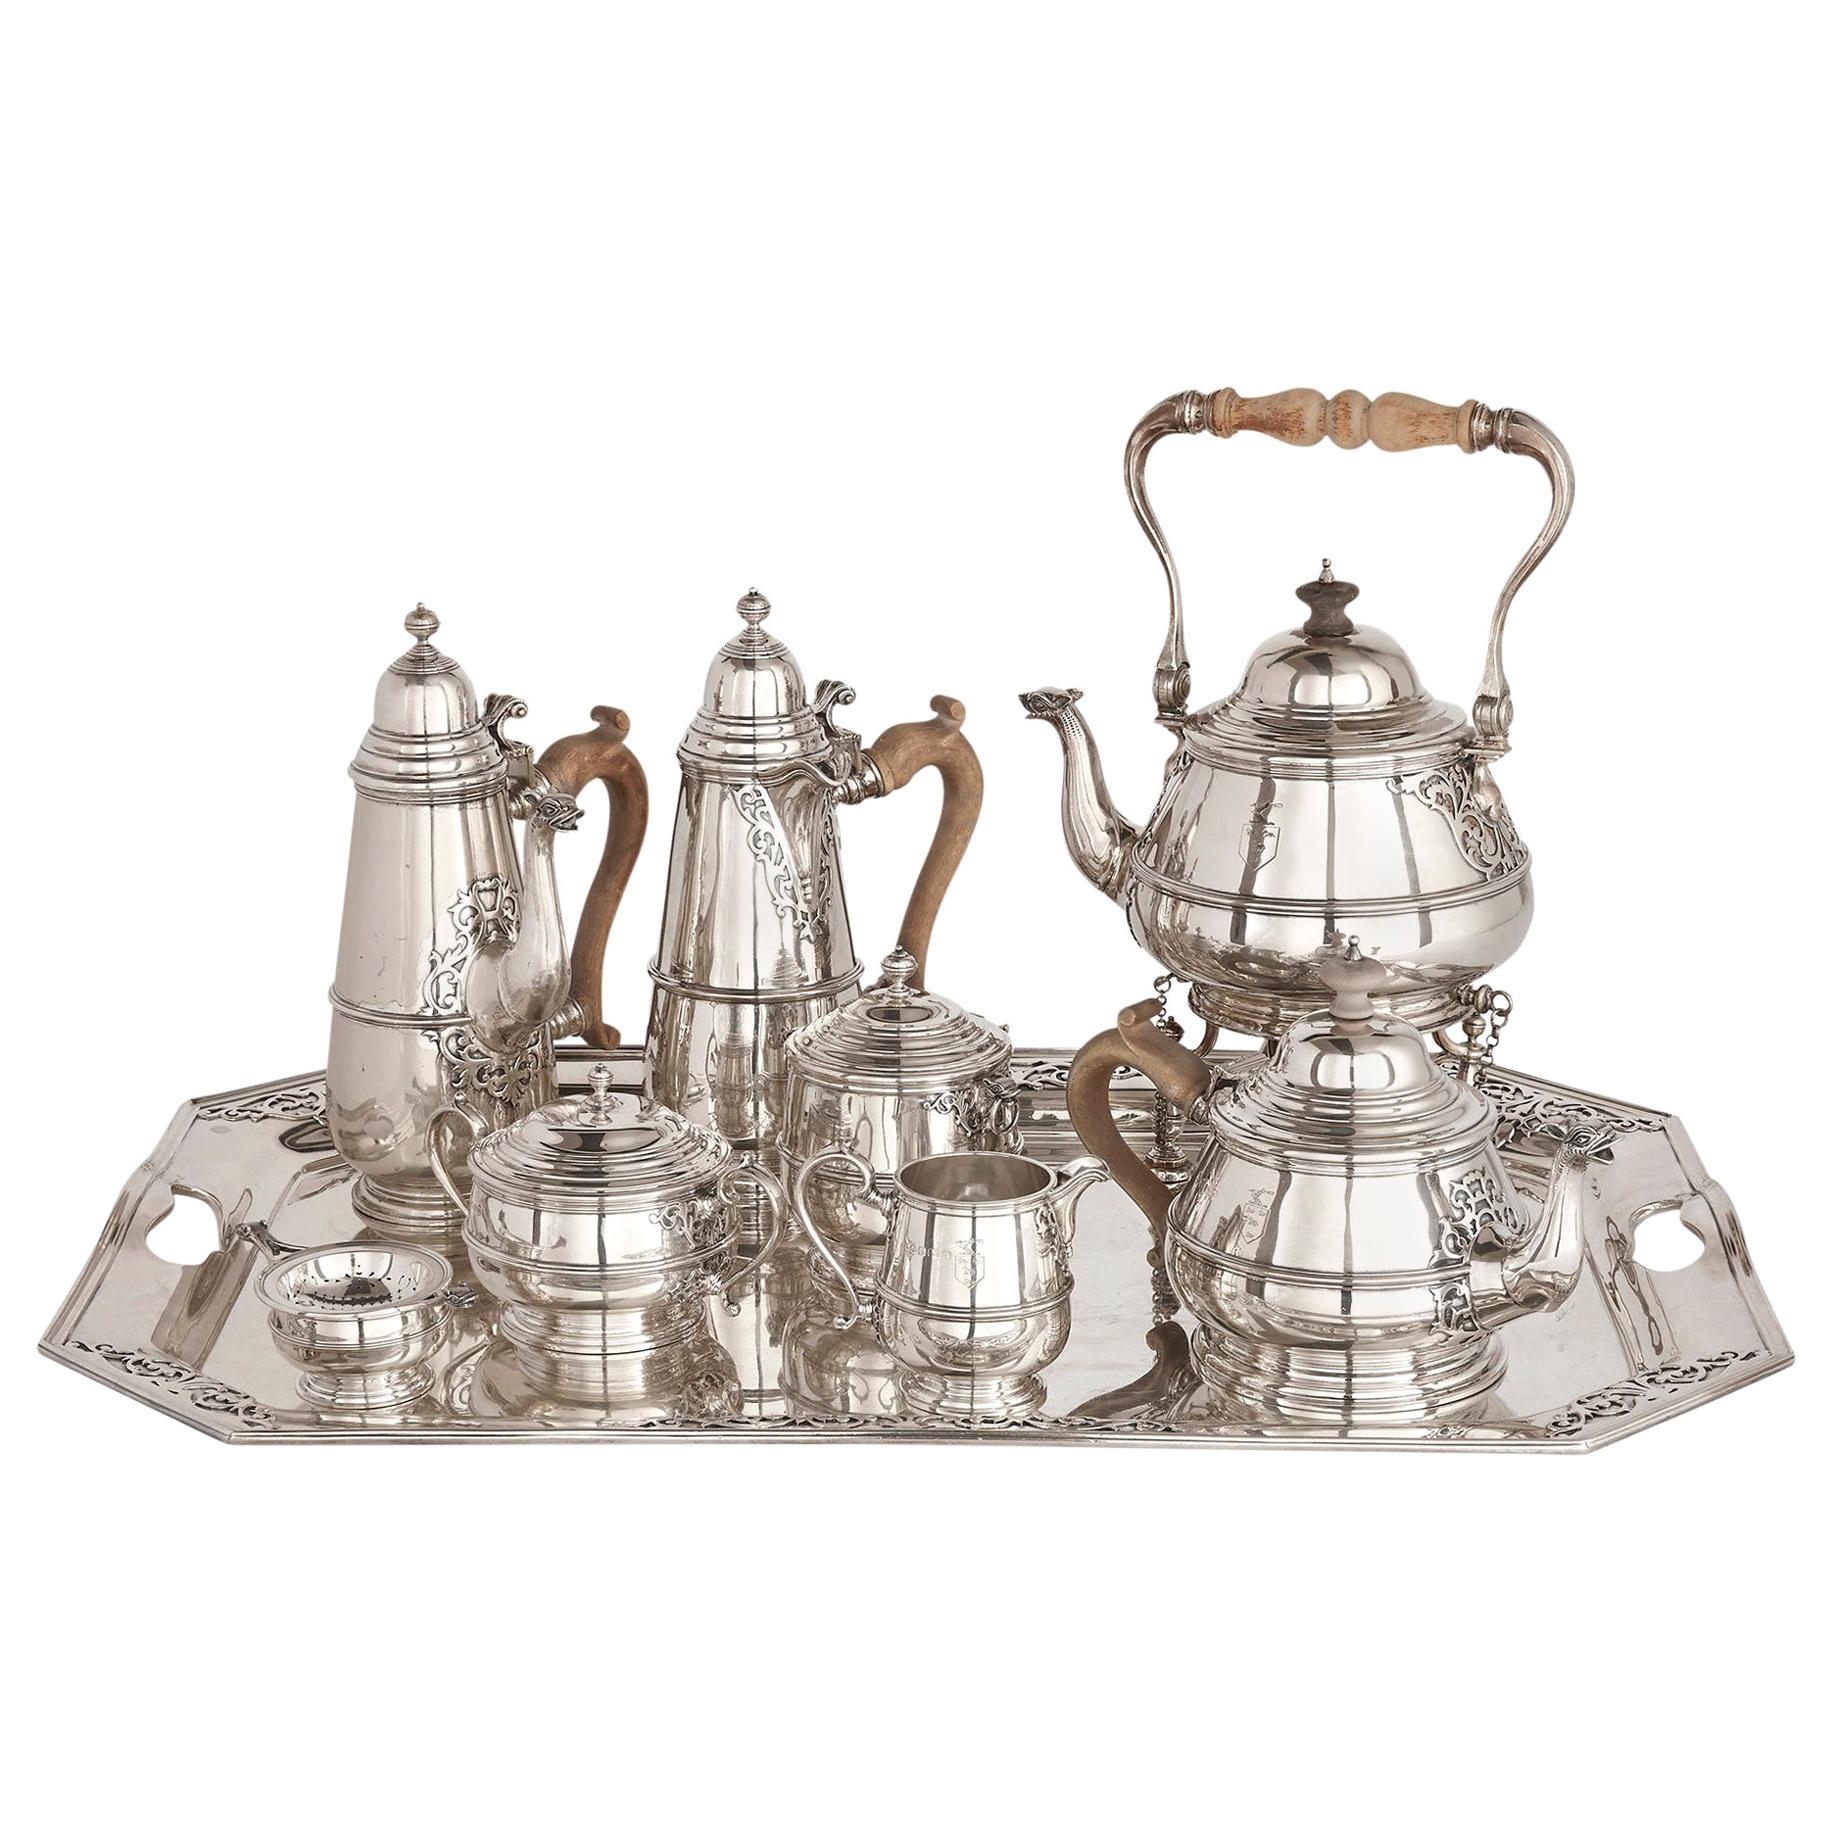 Silver Tea and Coffee Set with Matching Tray